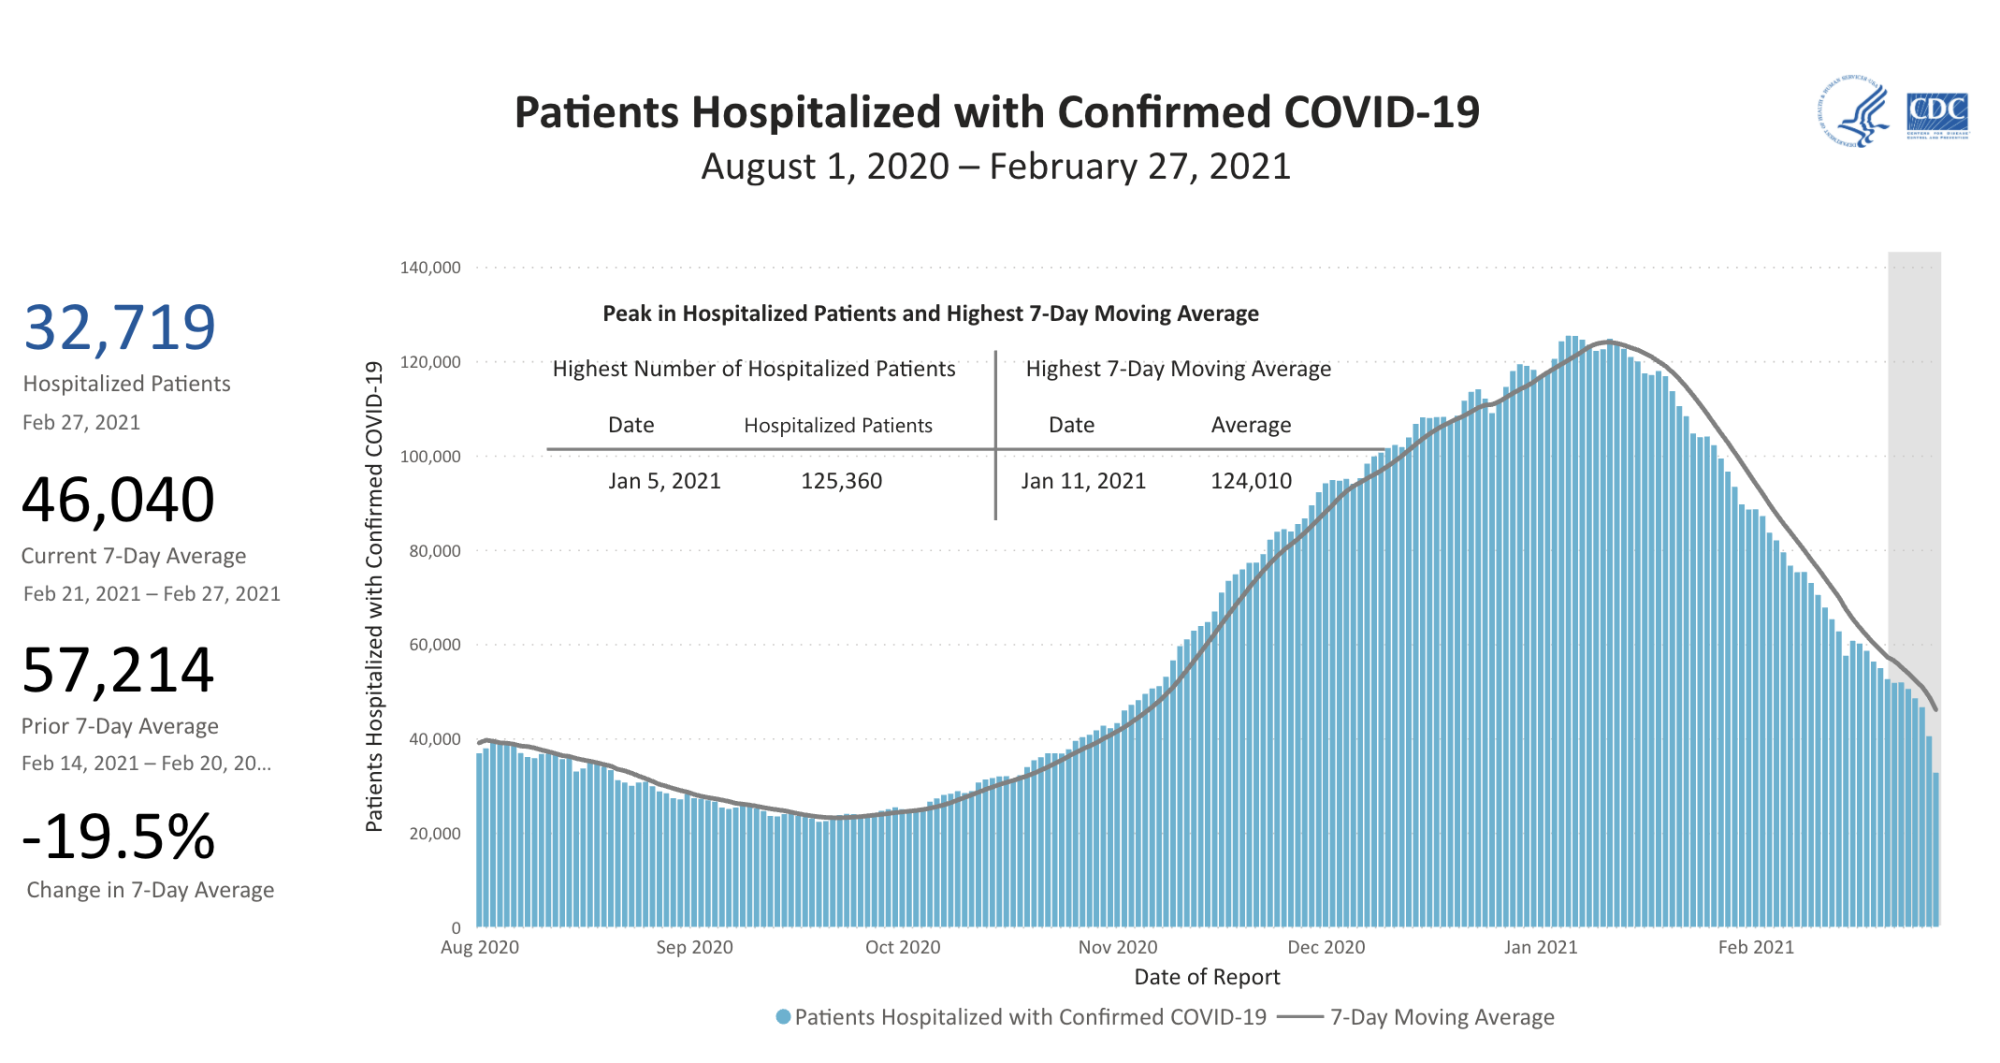 CDC Covid Data Tracker chart of Patients Hospitalized with Confirmed COVID-19 showing data for August 1, 2020 through February 27, 2021. The graph begins at about 40,000, dips to about 30,000 in fall 2020, rises to a peak of about 120,000 in early 2021, then drops sharply to end at a 7-day average of 46,040 by the end of February 2021.